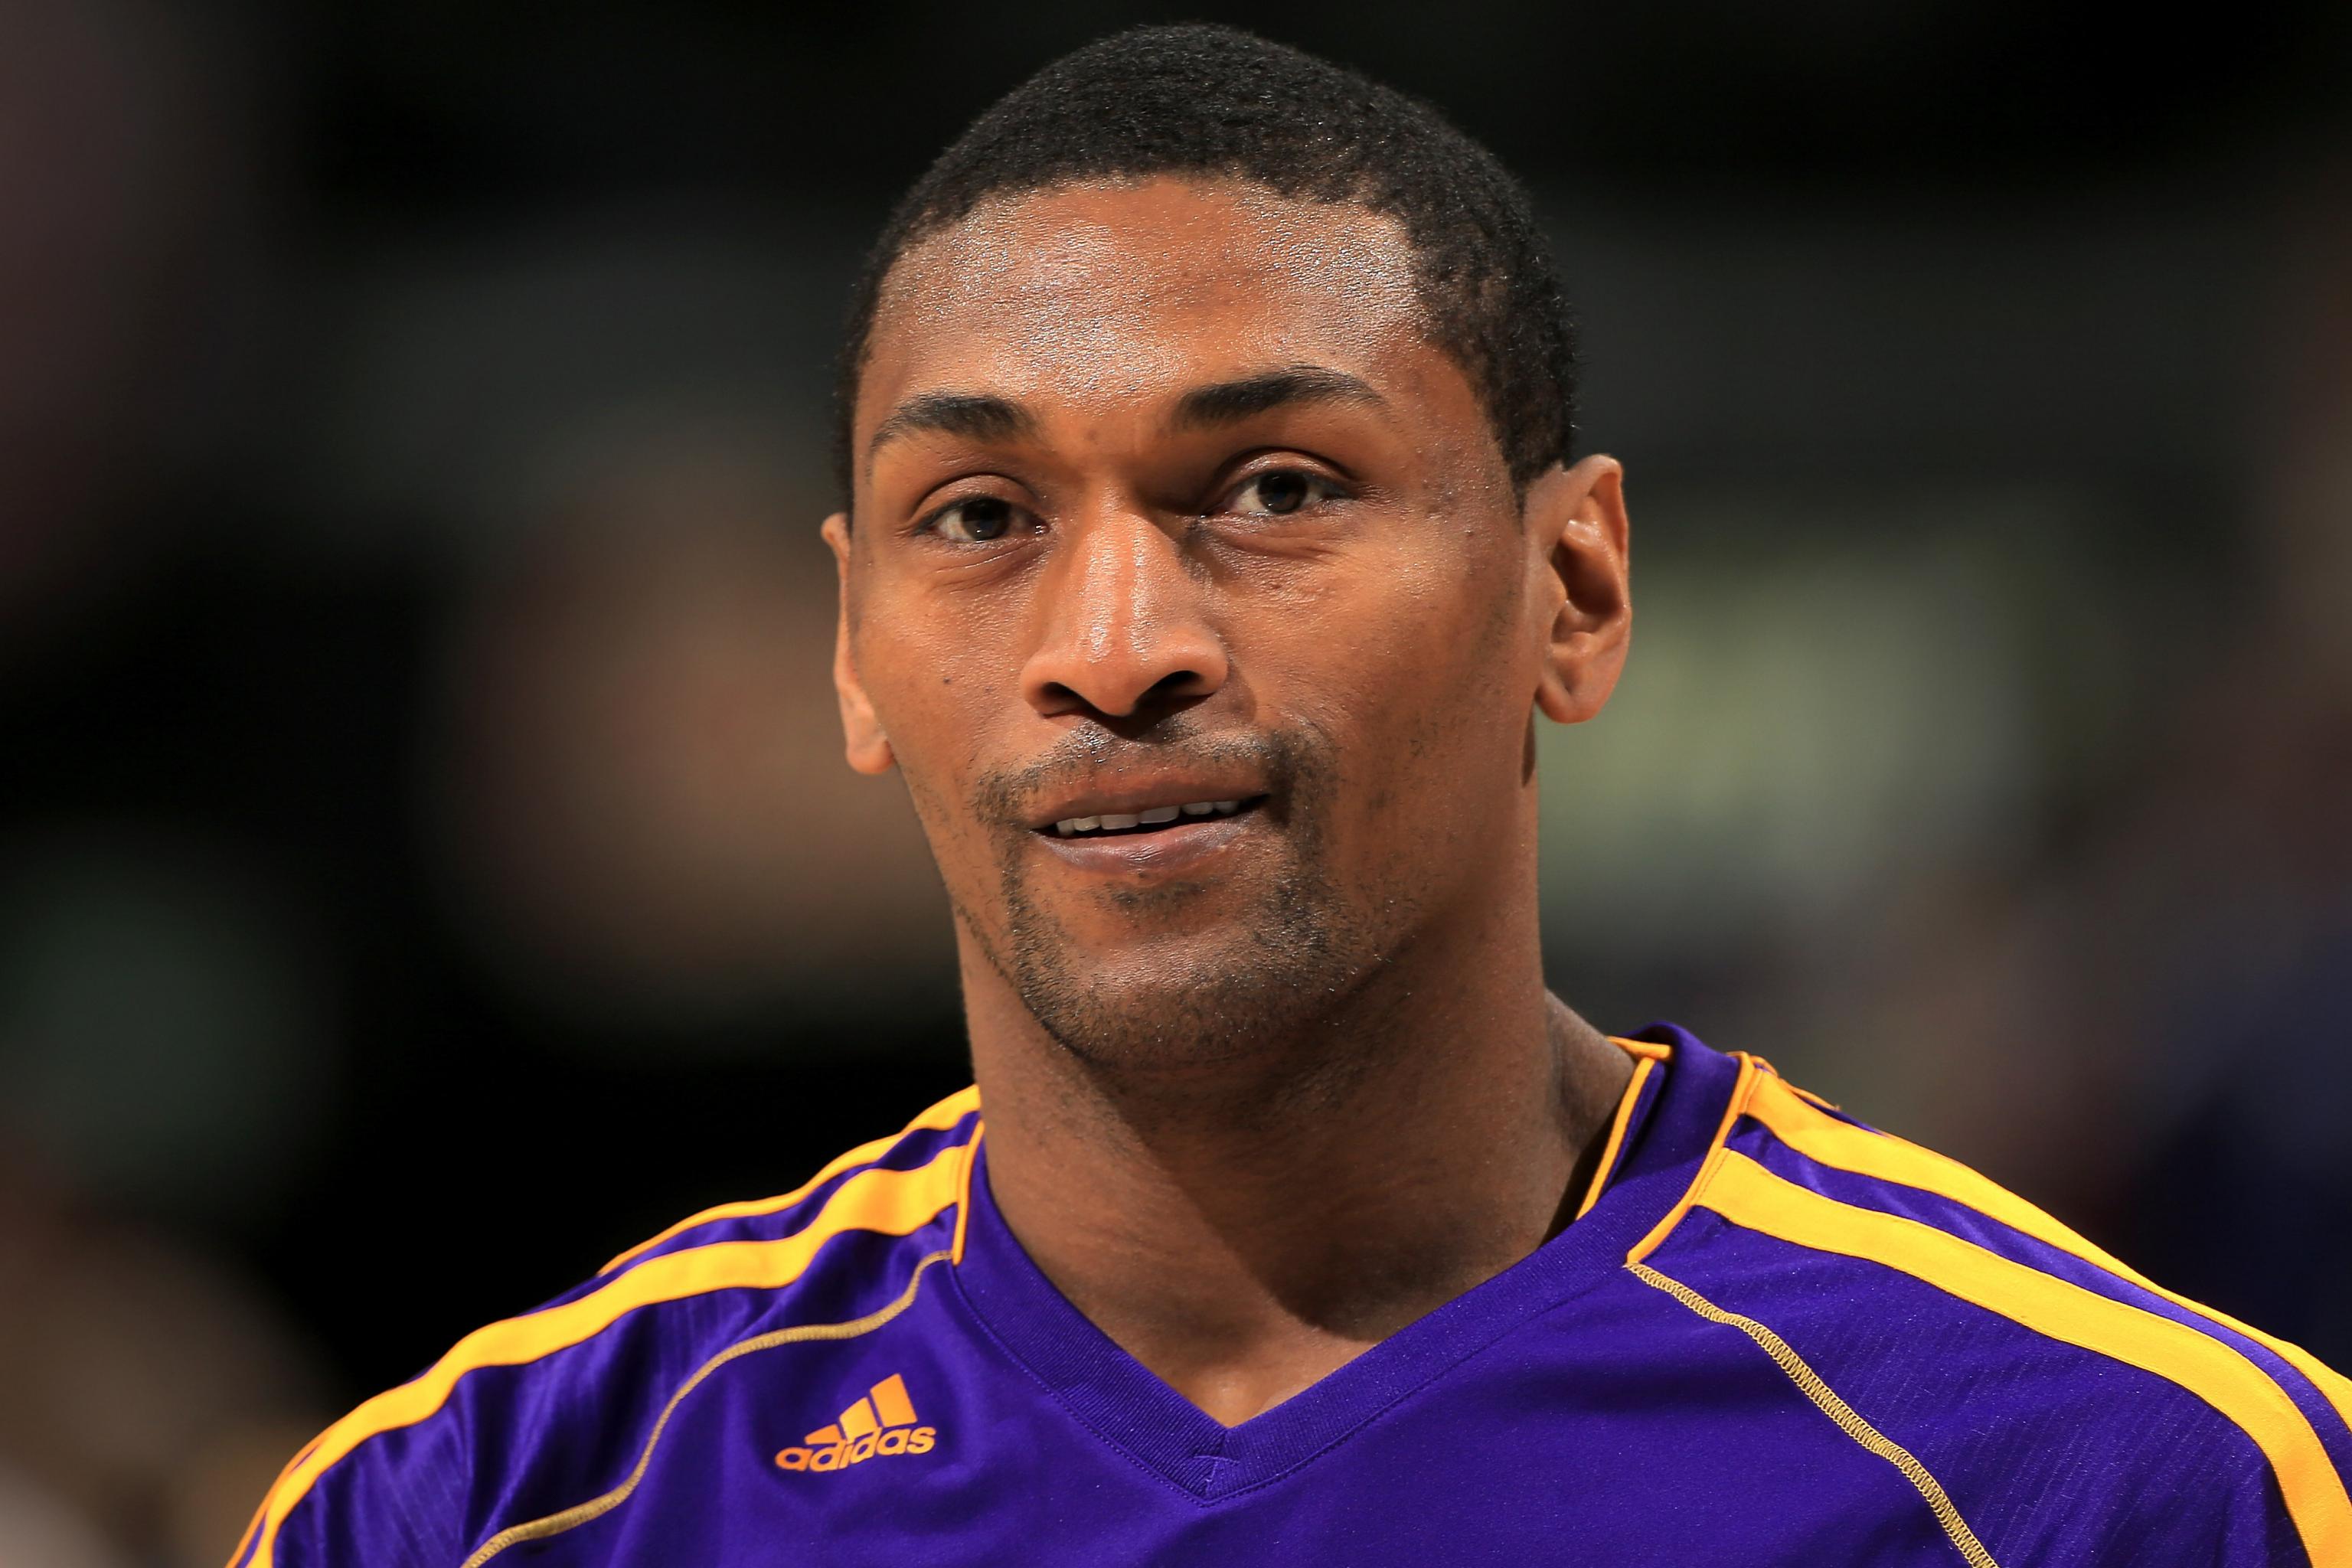 Lakers' Ron Artest set to change his name to Metta World Peace - CNN.com